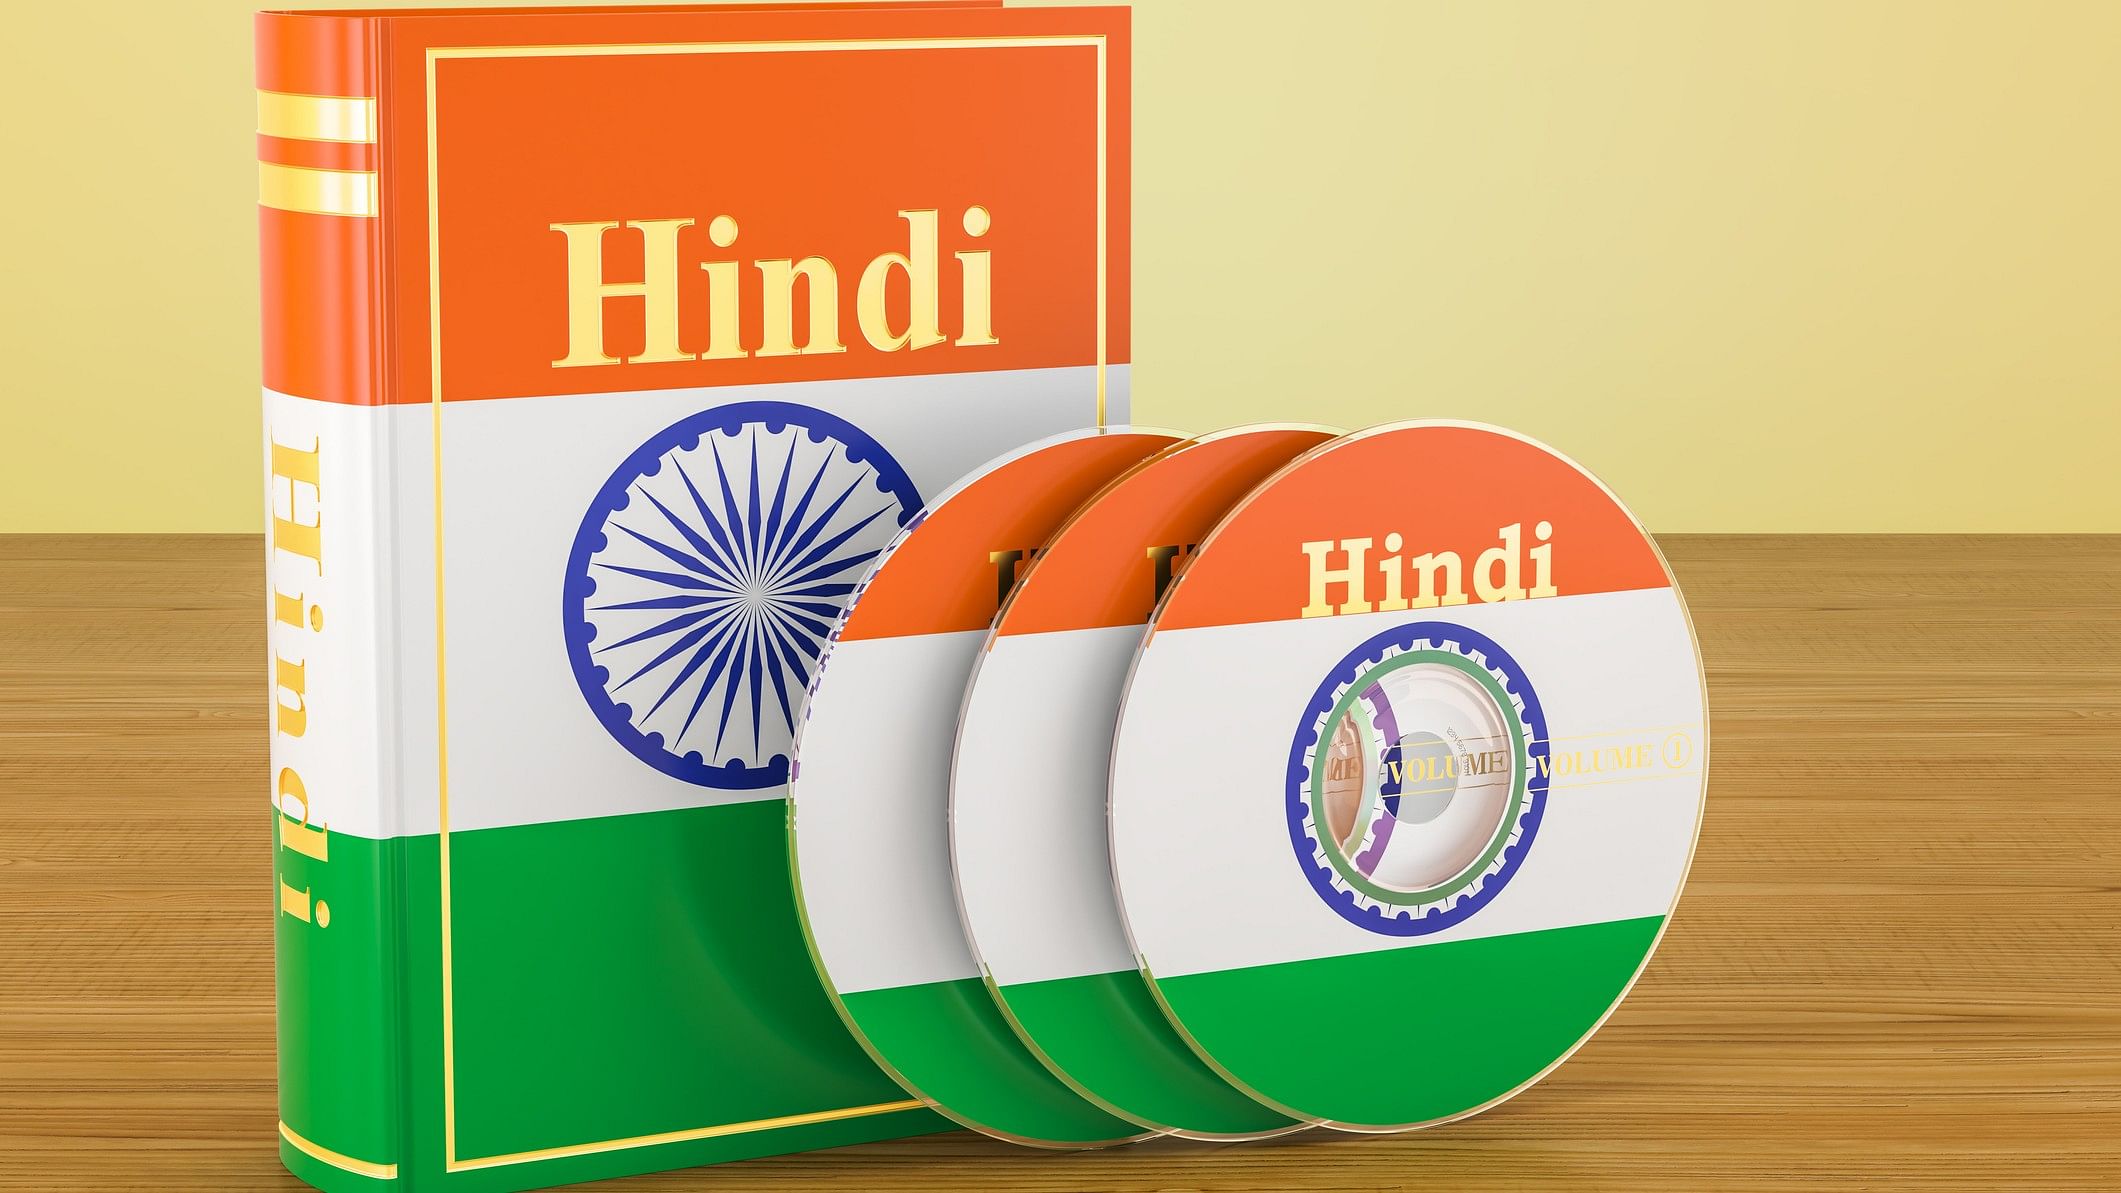 <div class="paragraphs"><p>The AIADMK candidates are pitching that they can switch to Hindi in the Parliament if needed to better represent people's issues. Representative image.</p></div>